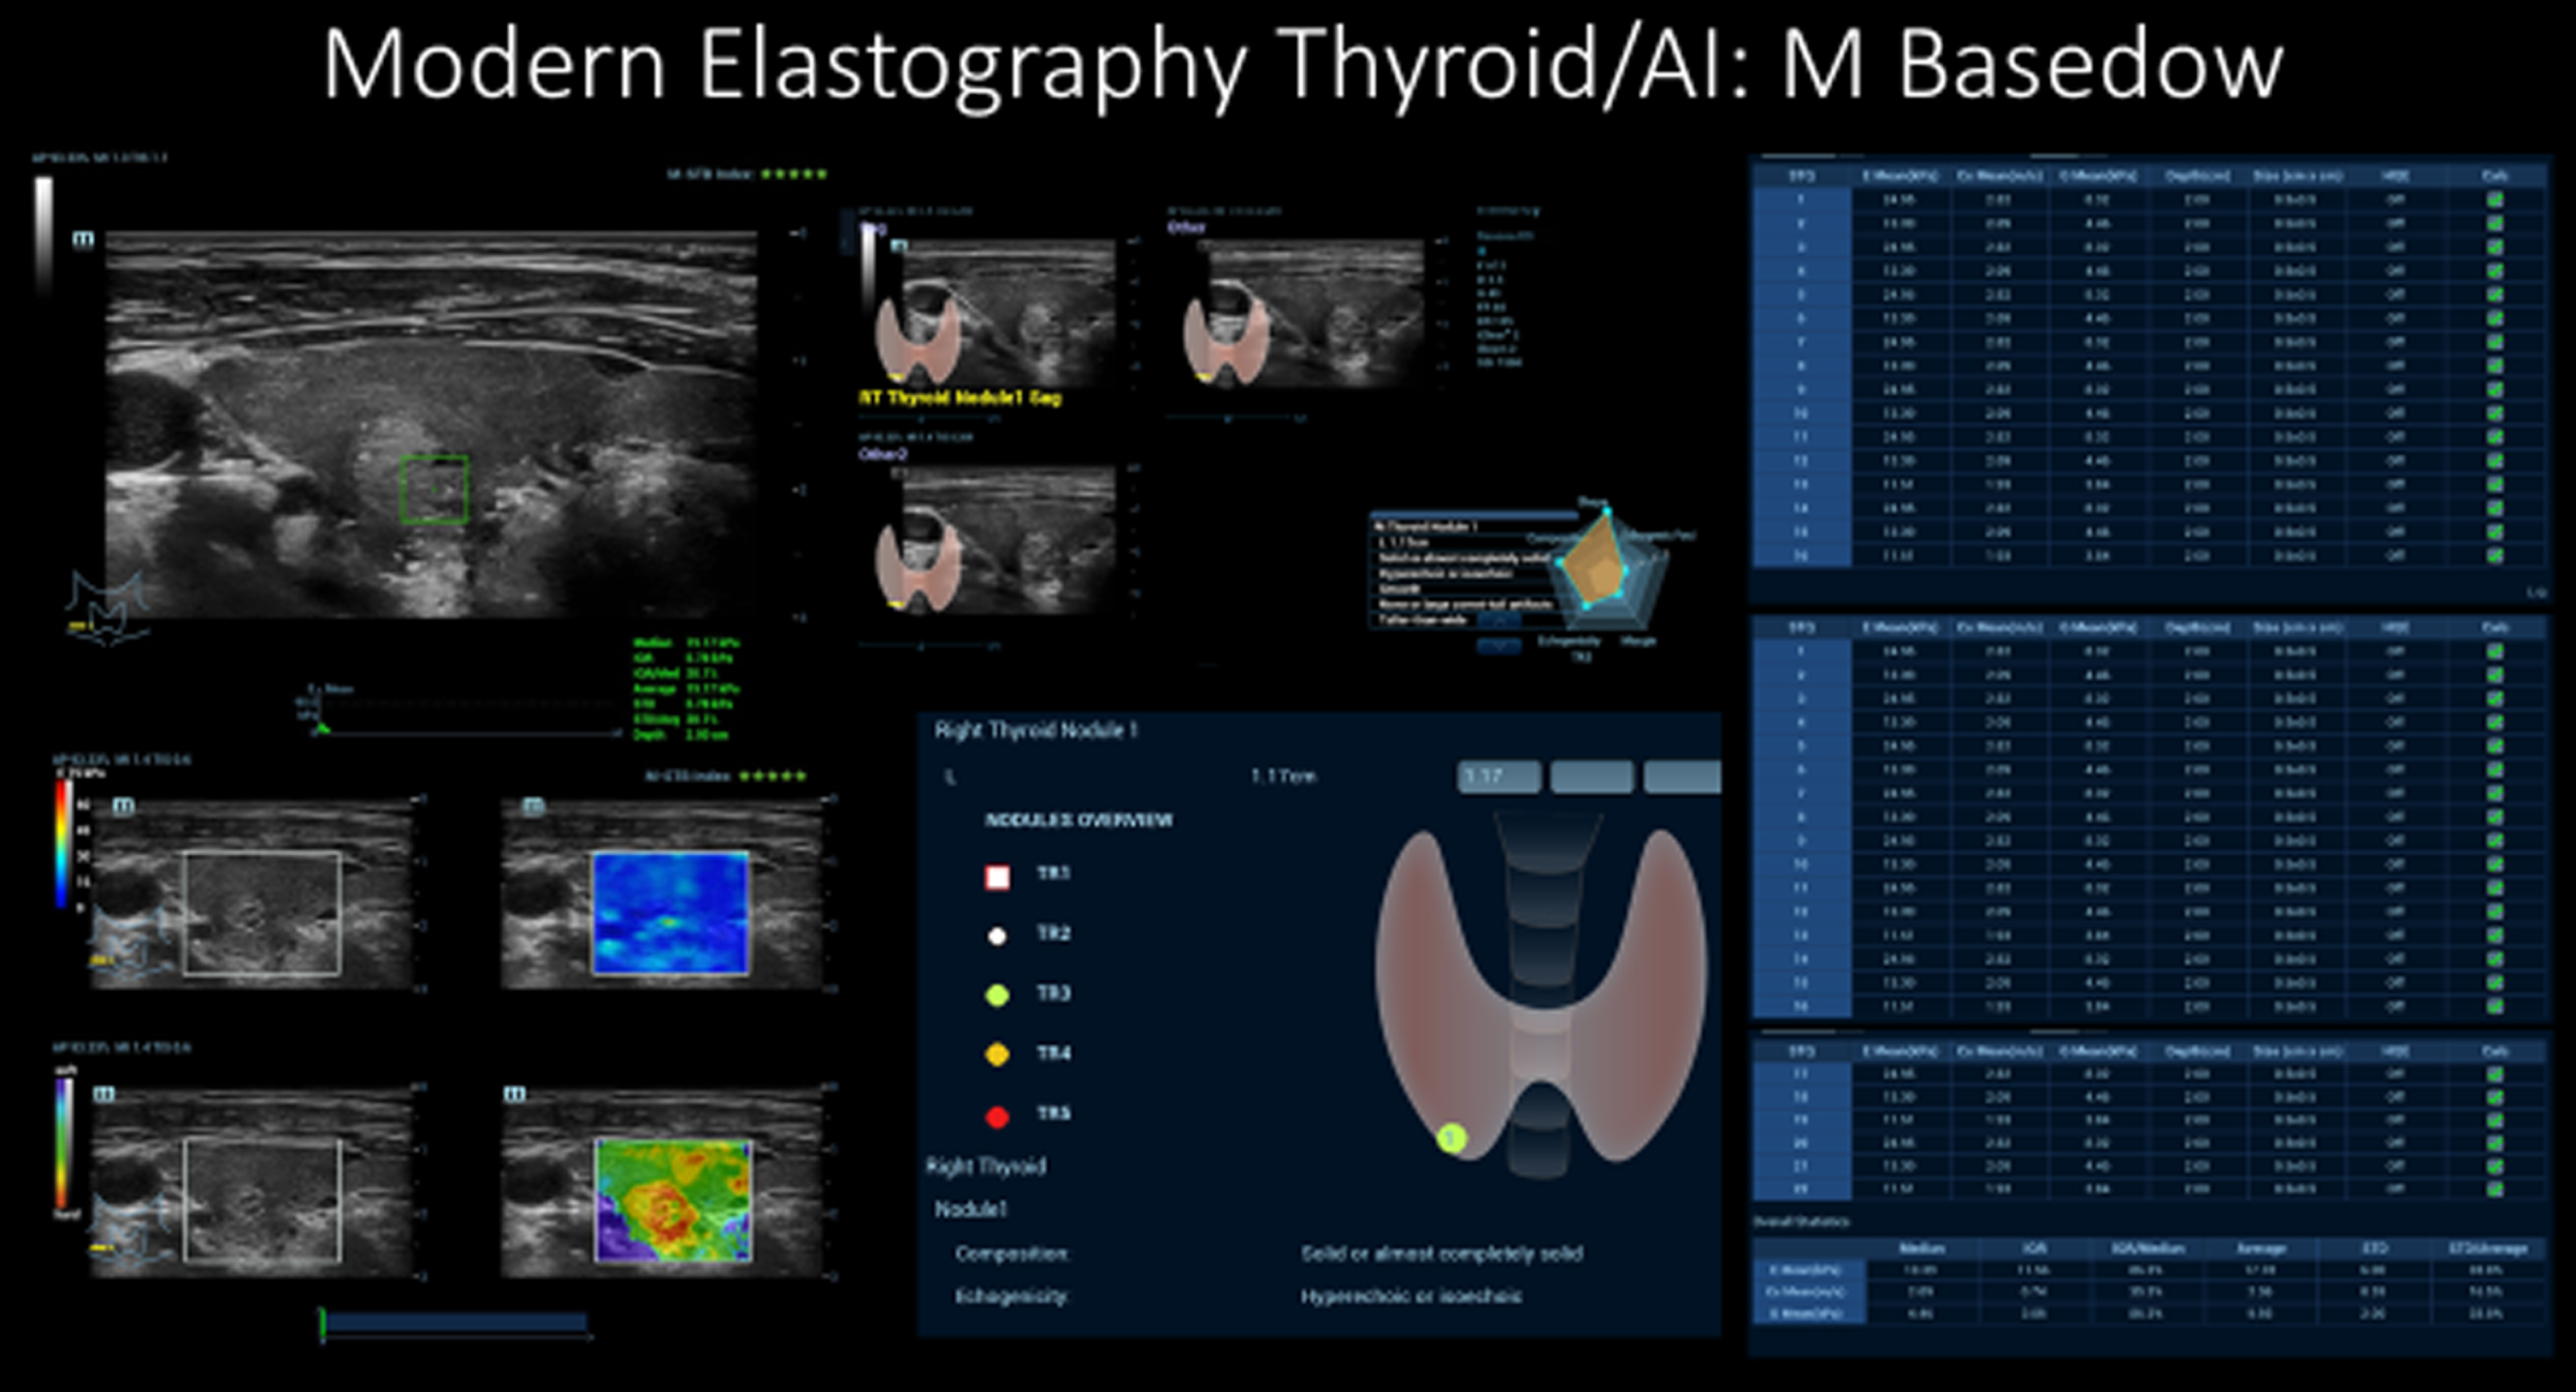 Modern multimodal thyroid diagnostics with artificial intelligence (AI).